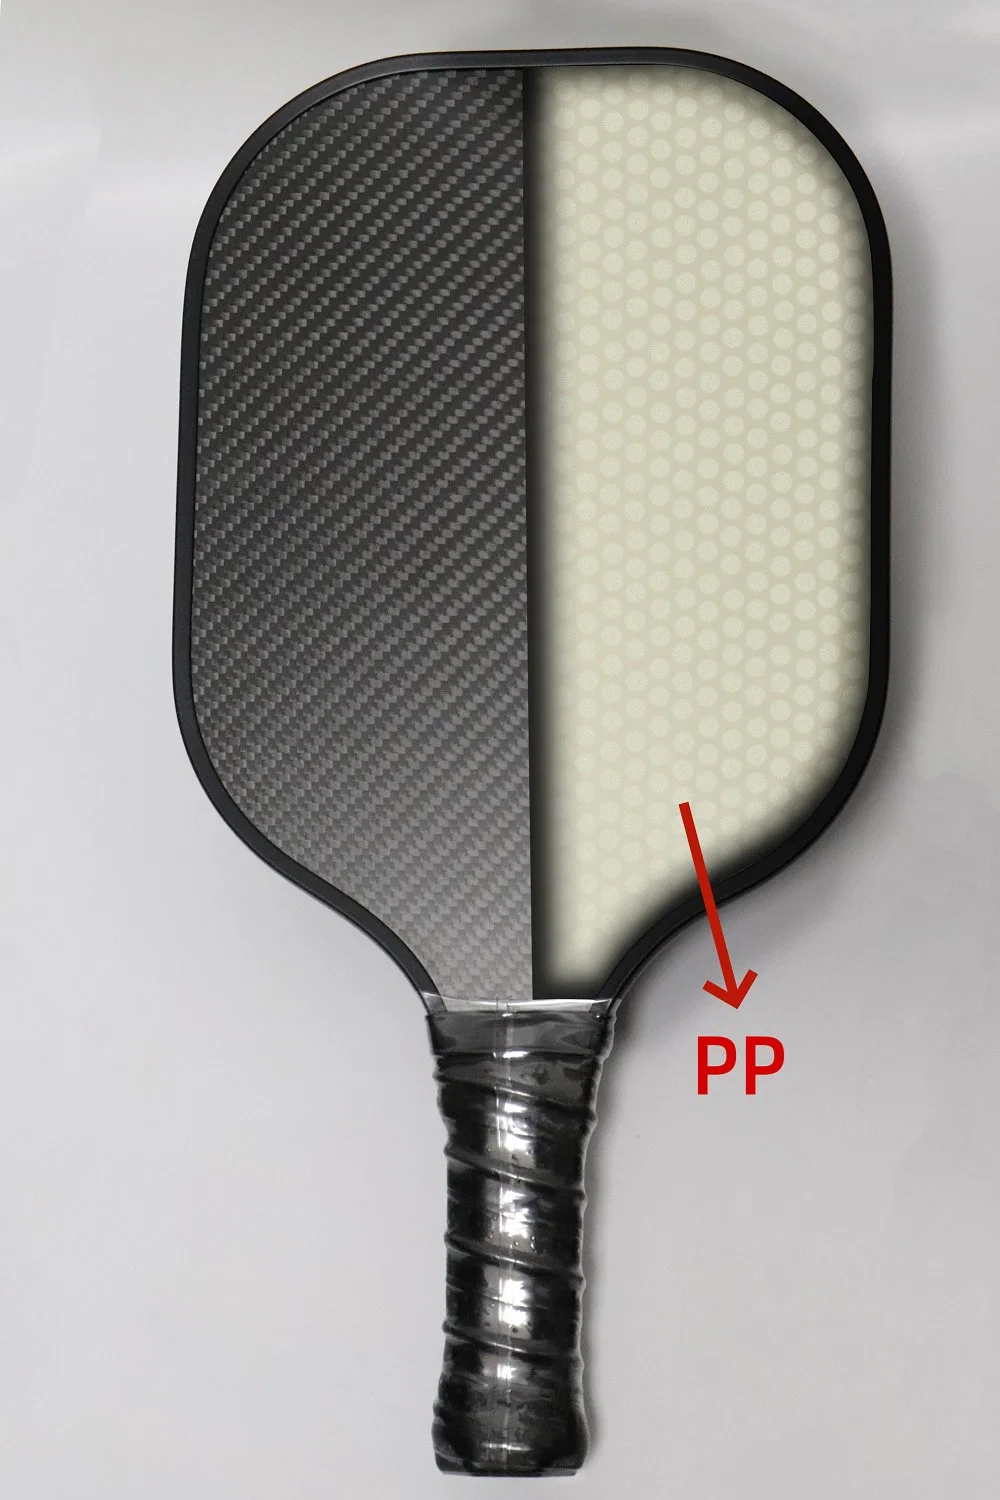 High Quality Lightweight Carbon 3K Pickleball Paddle Graphite, China Pickleball Paddle